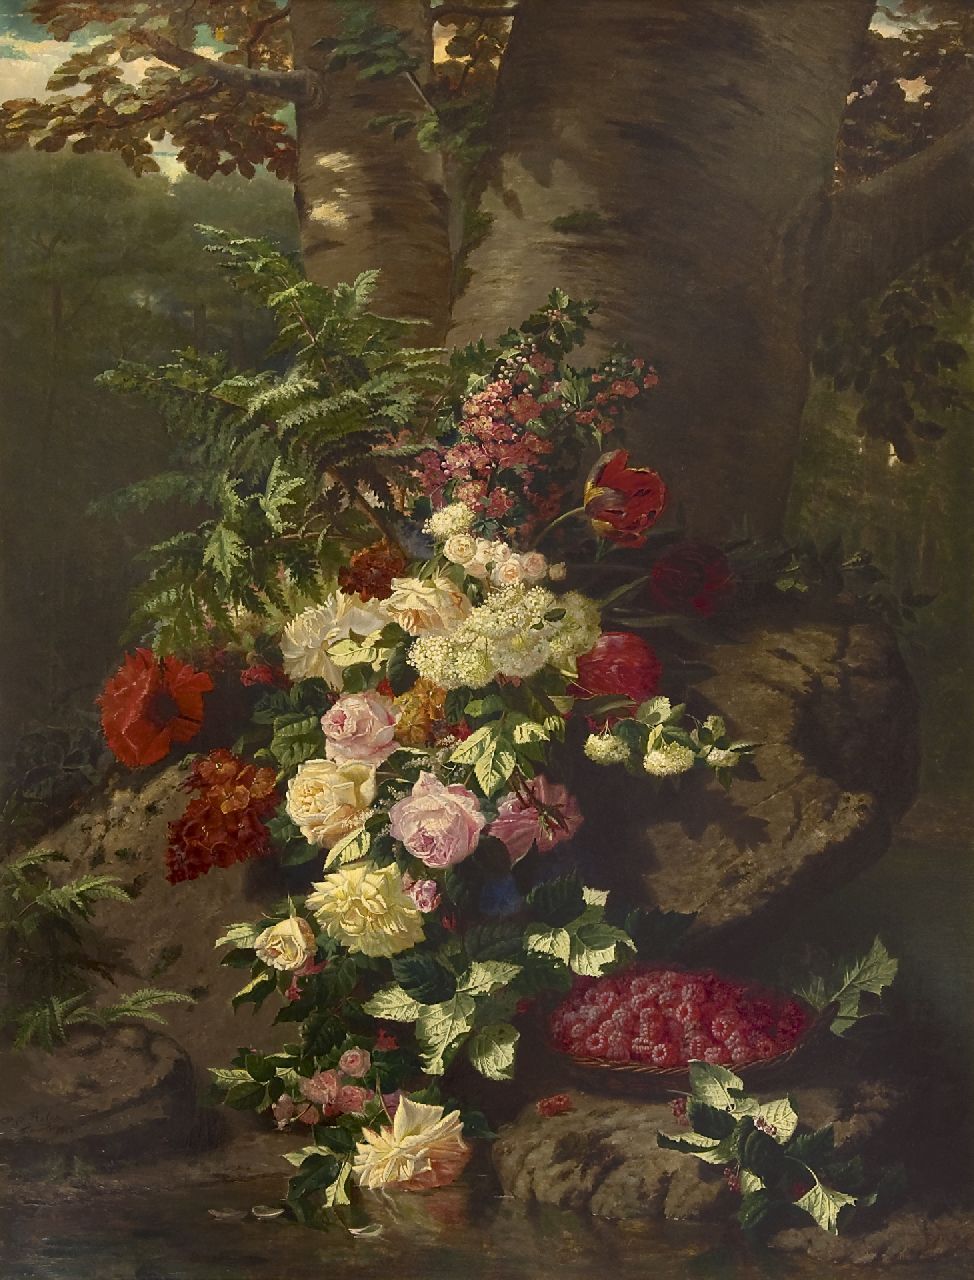 Robie J.B.  | Jean-Baptiste Robie | Paintings offered for sale | Flower still life with roses, flowering branches and raspberries, oil on canvas 137.7 x 106.0 cm, signed l.l. and dated 'Bruxelles' 1864